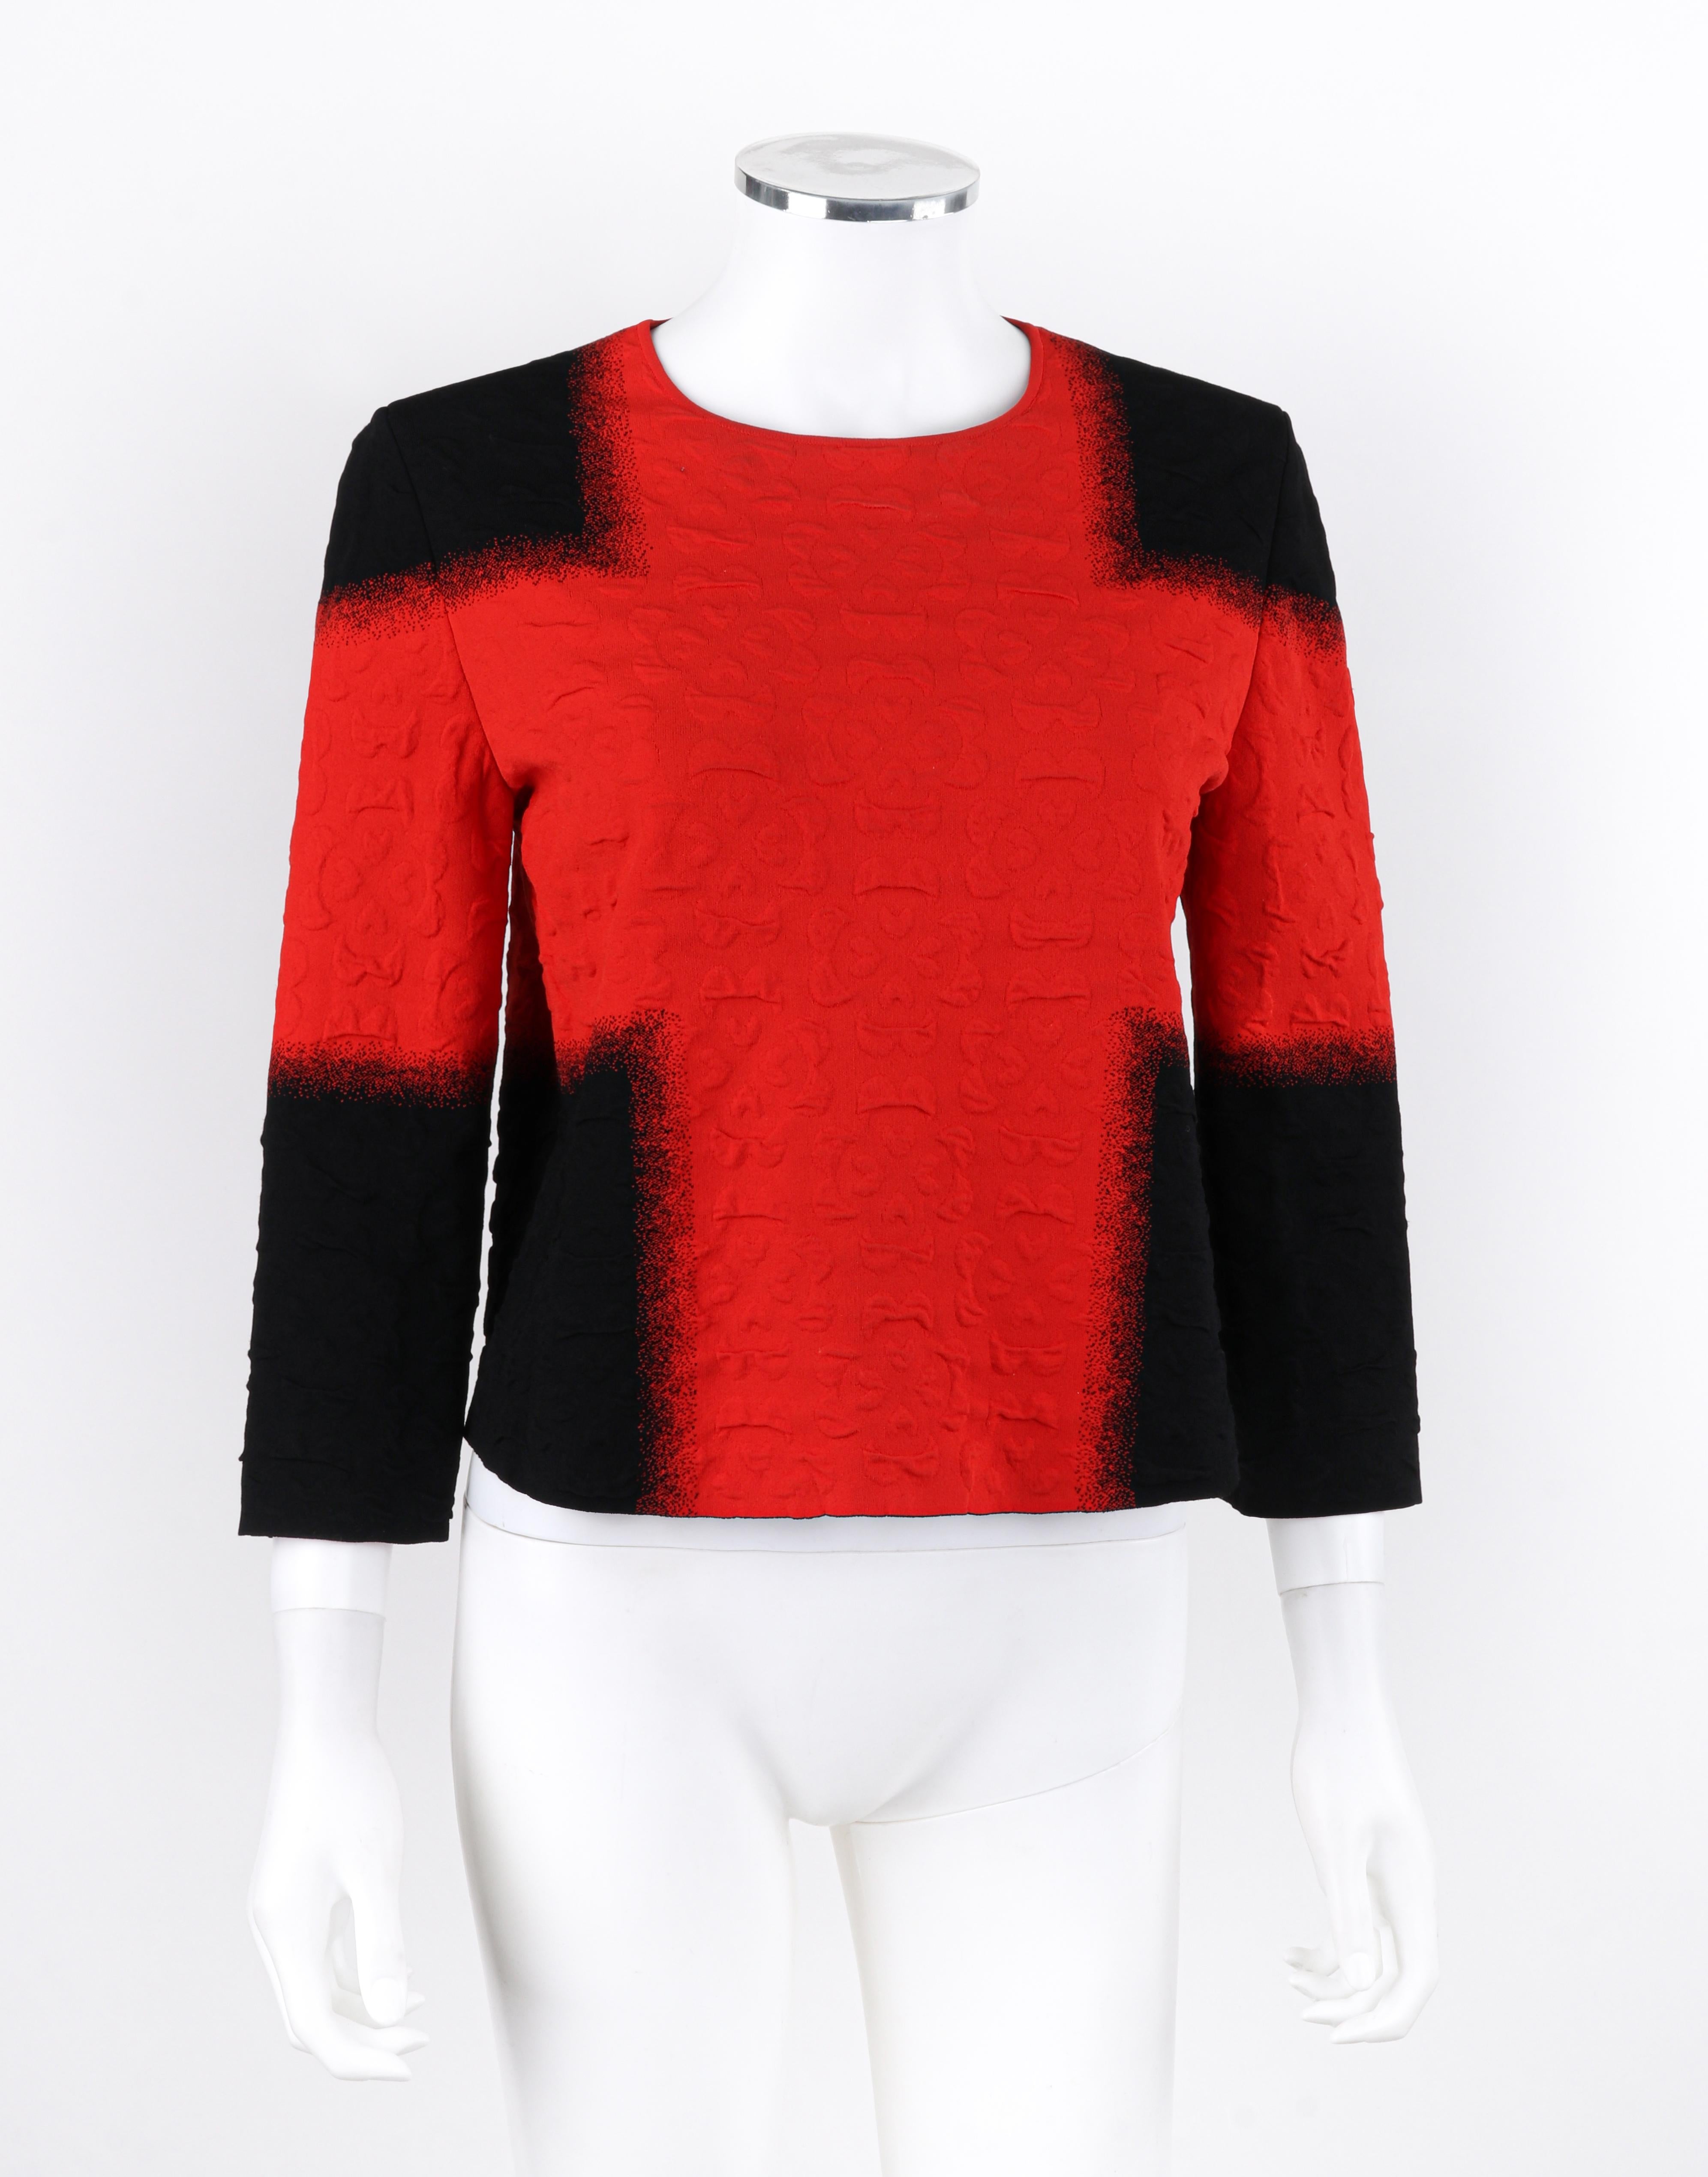 ALEXANDER McQUEEN Resort 2015 Black Red Embossed Stretch Knit Colorblock Top  For Sale 1